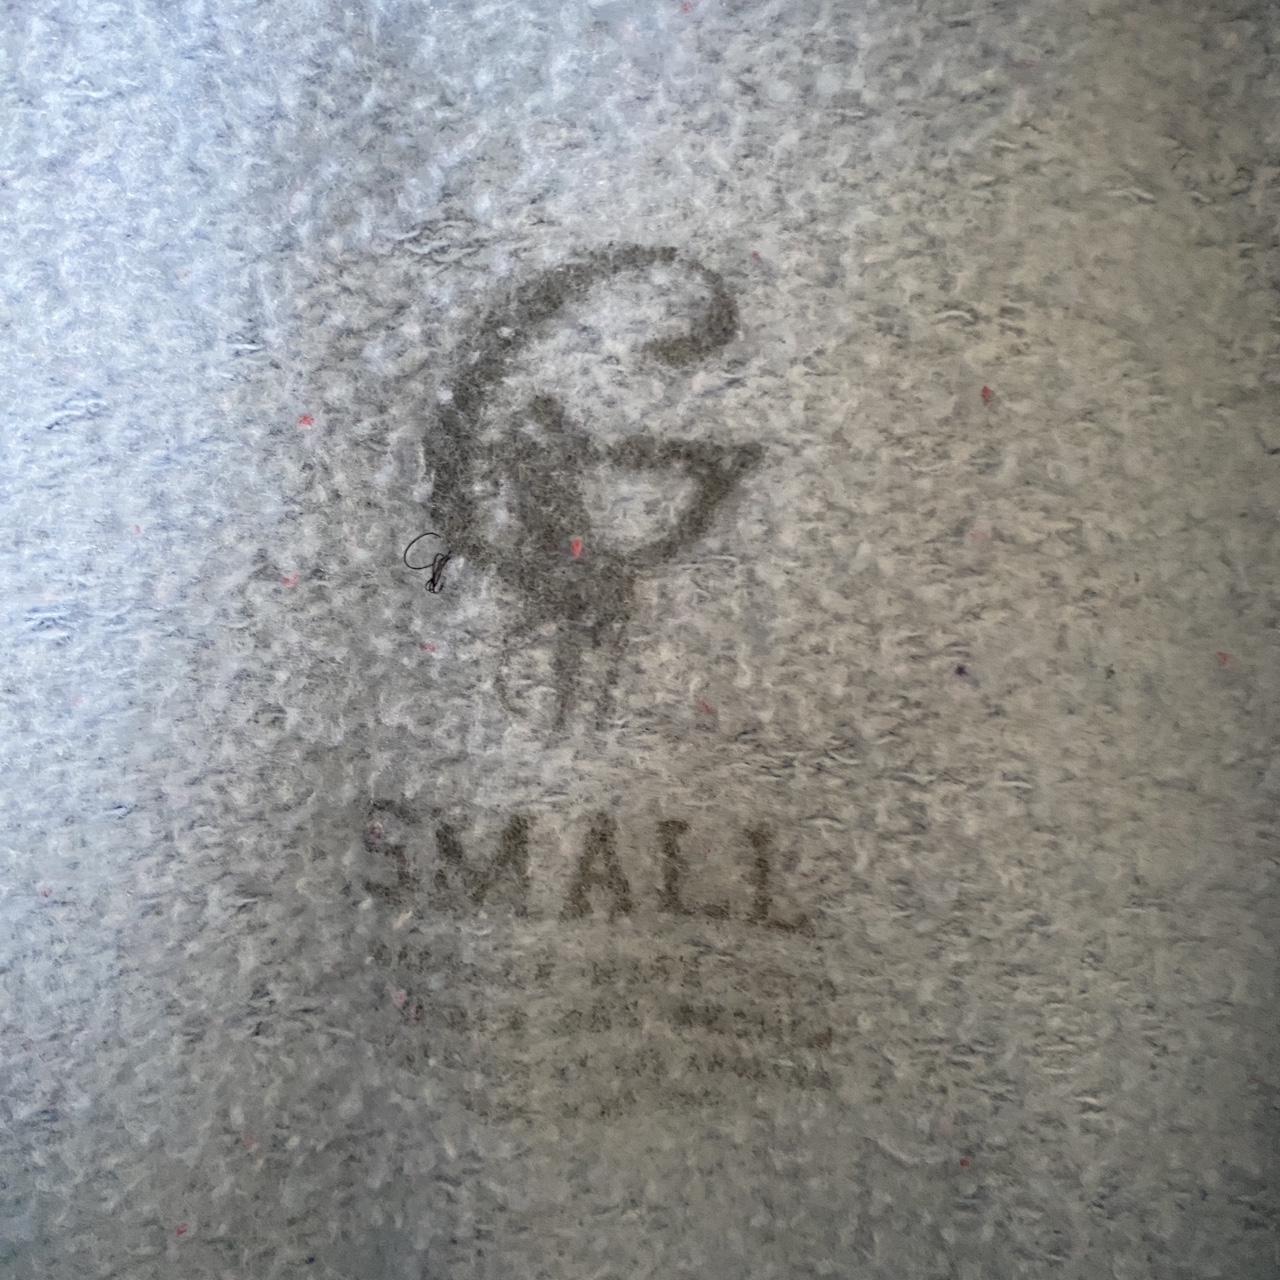 Small polo g merch worn has one mark on the back but - Depop